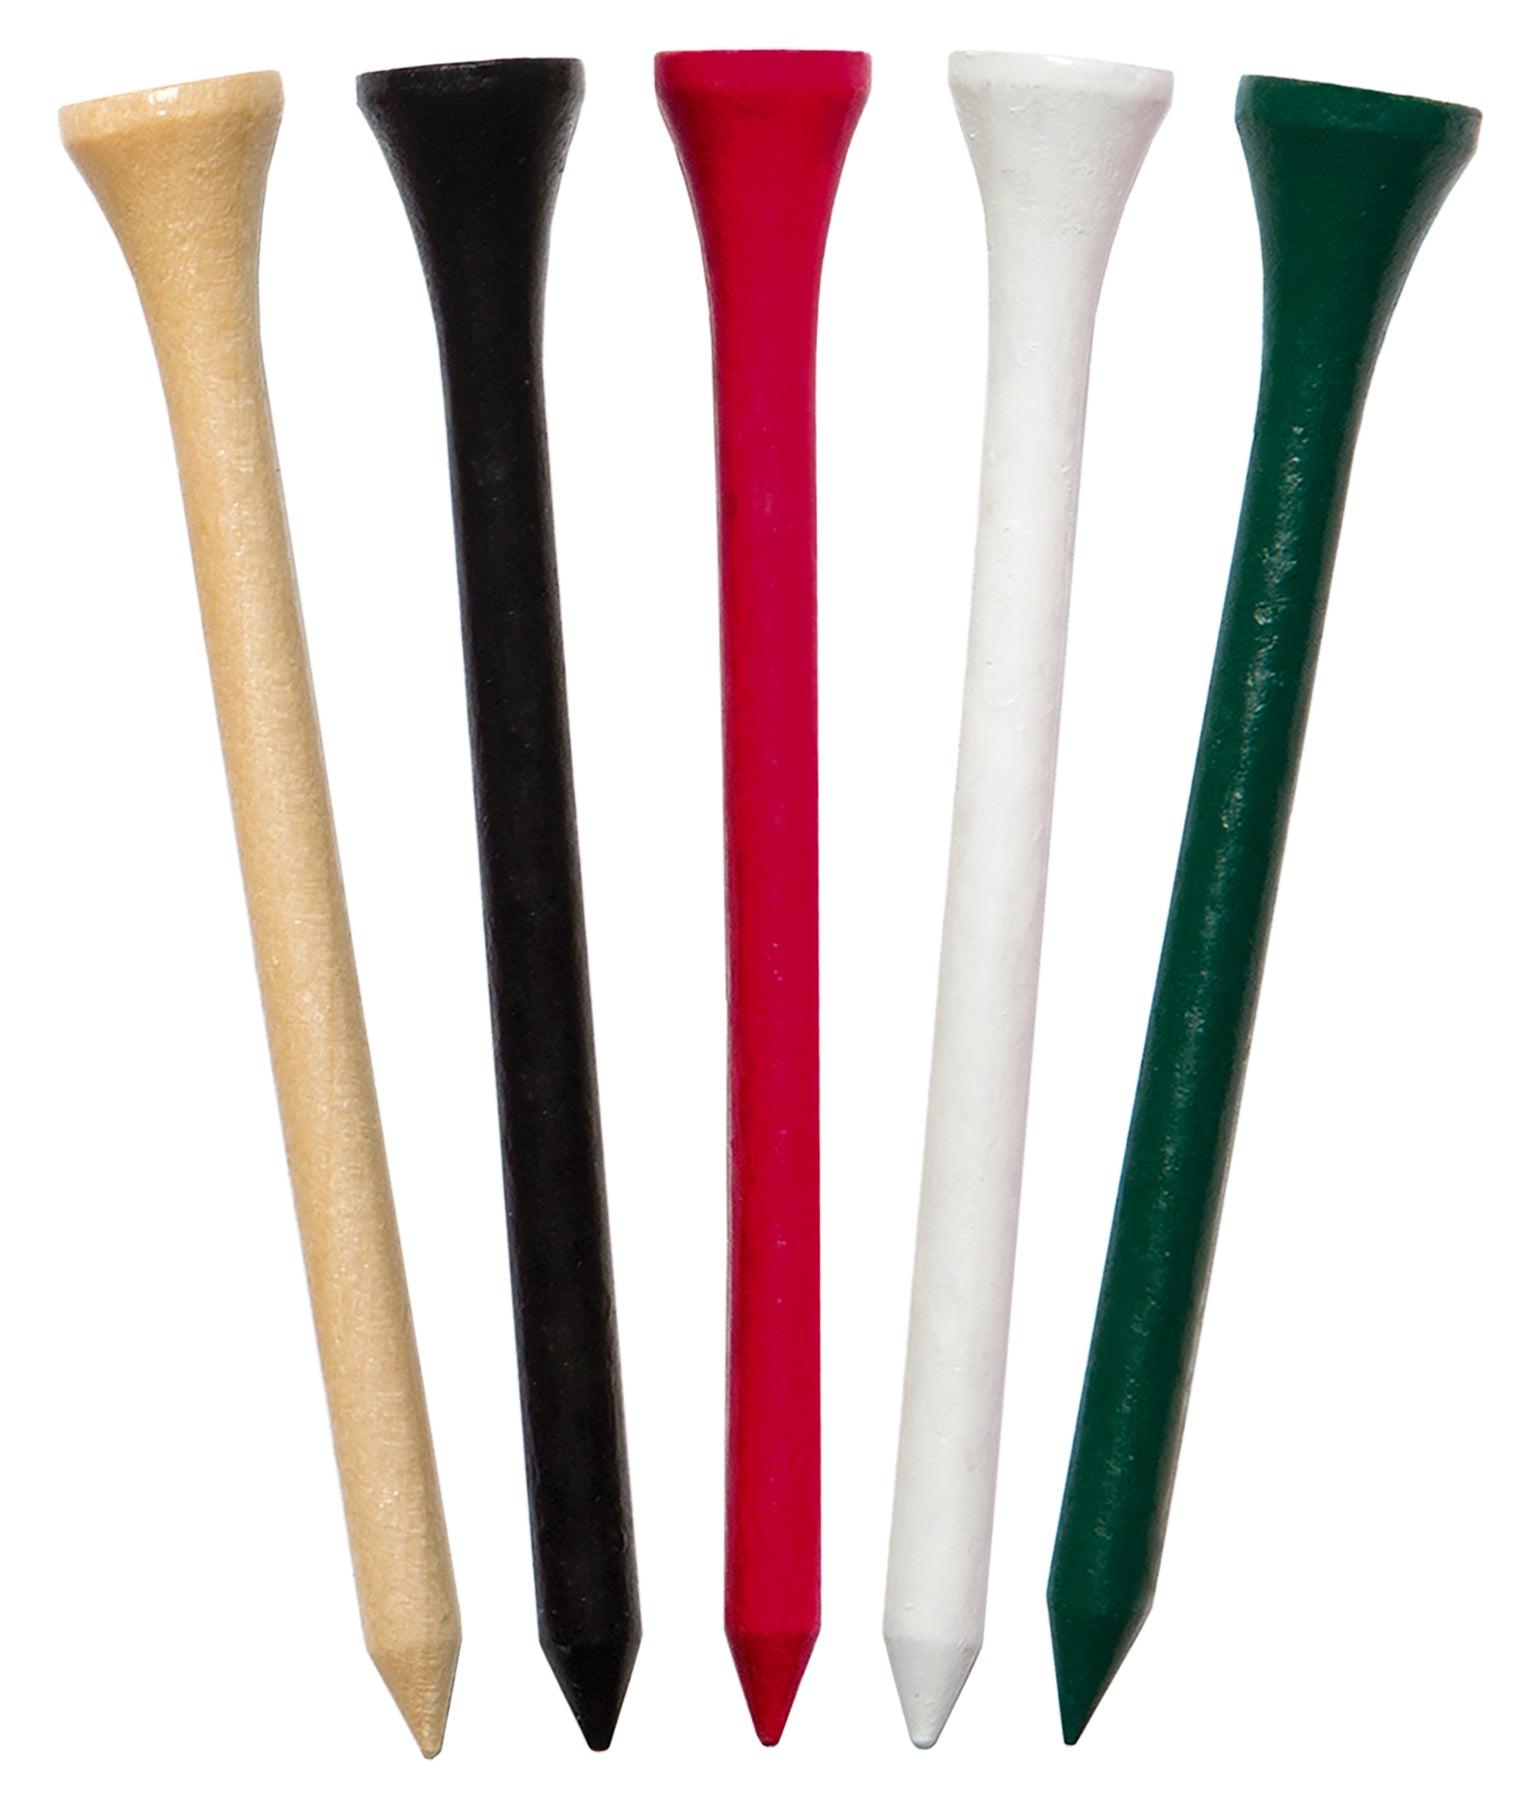 Juvale 300 Pack Bamboo Golf Tees in Bulk (2 3/4 inch, Natural Wood Color)